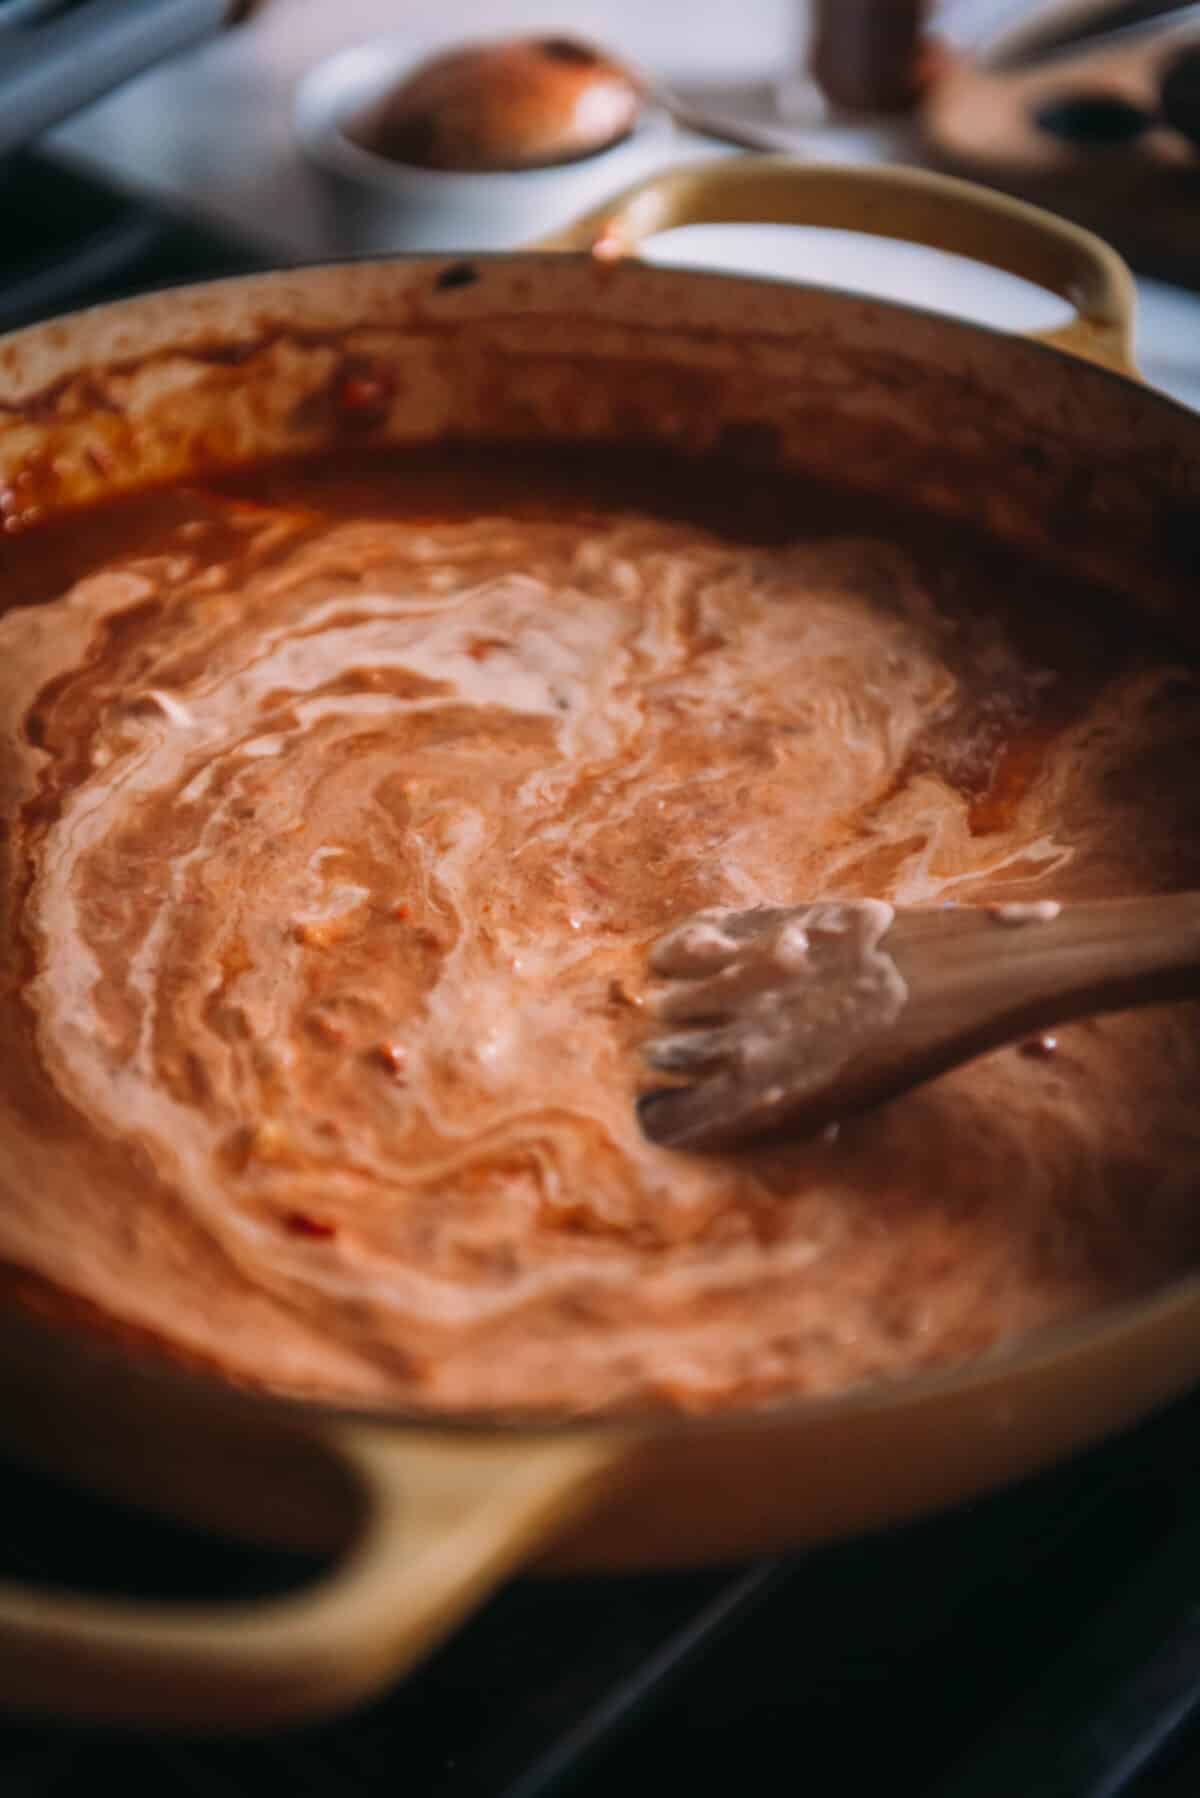 A pot of sauce with swirls of sour cream on the stove with a wooden spoon.